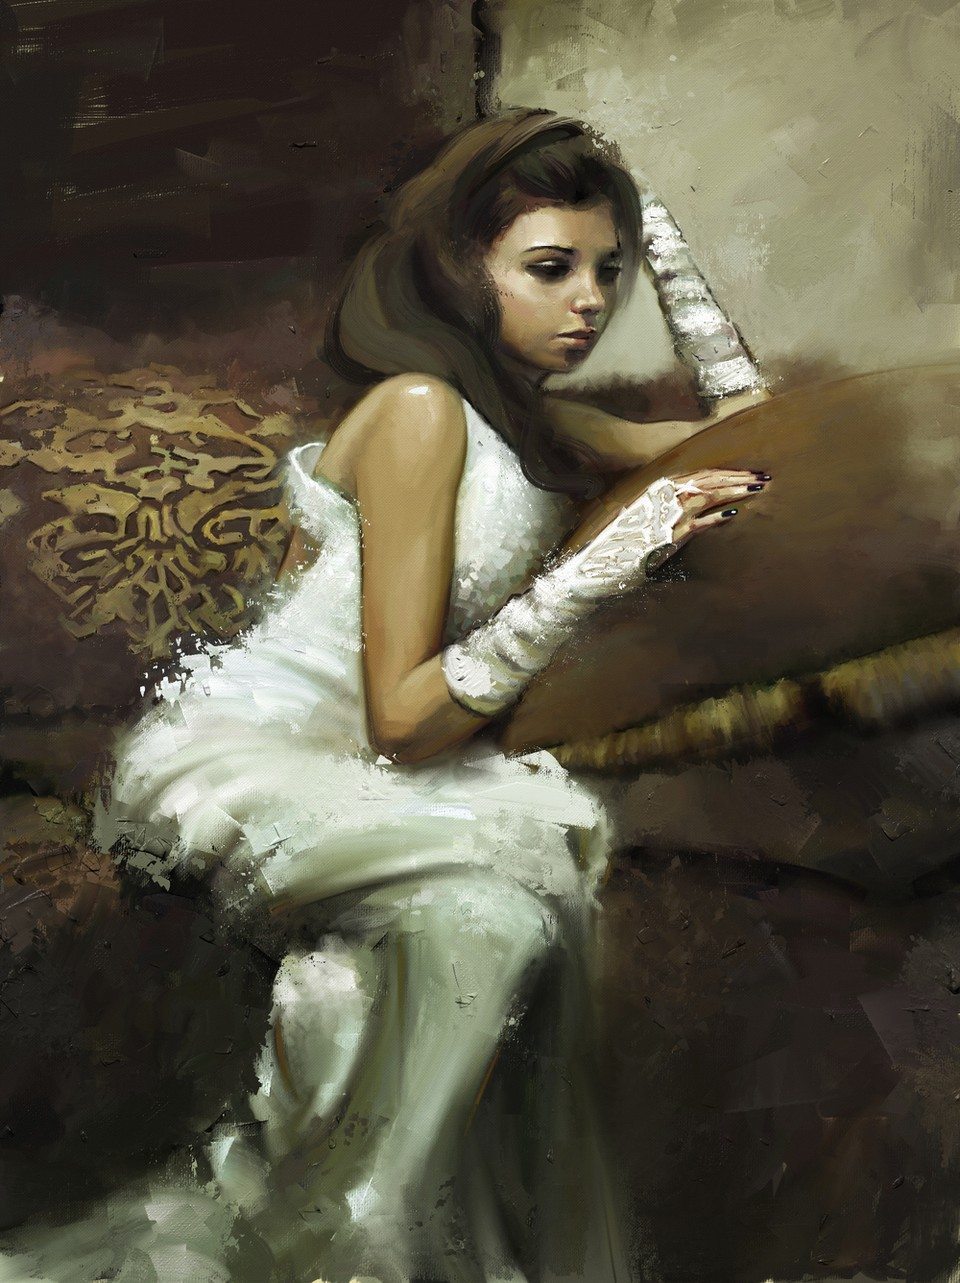 The Demure (Jeremy Mann's Study) by AndreaMG